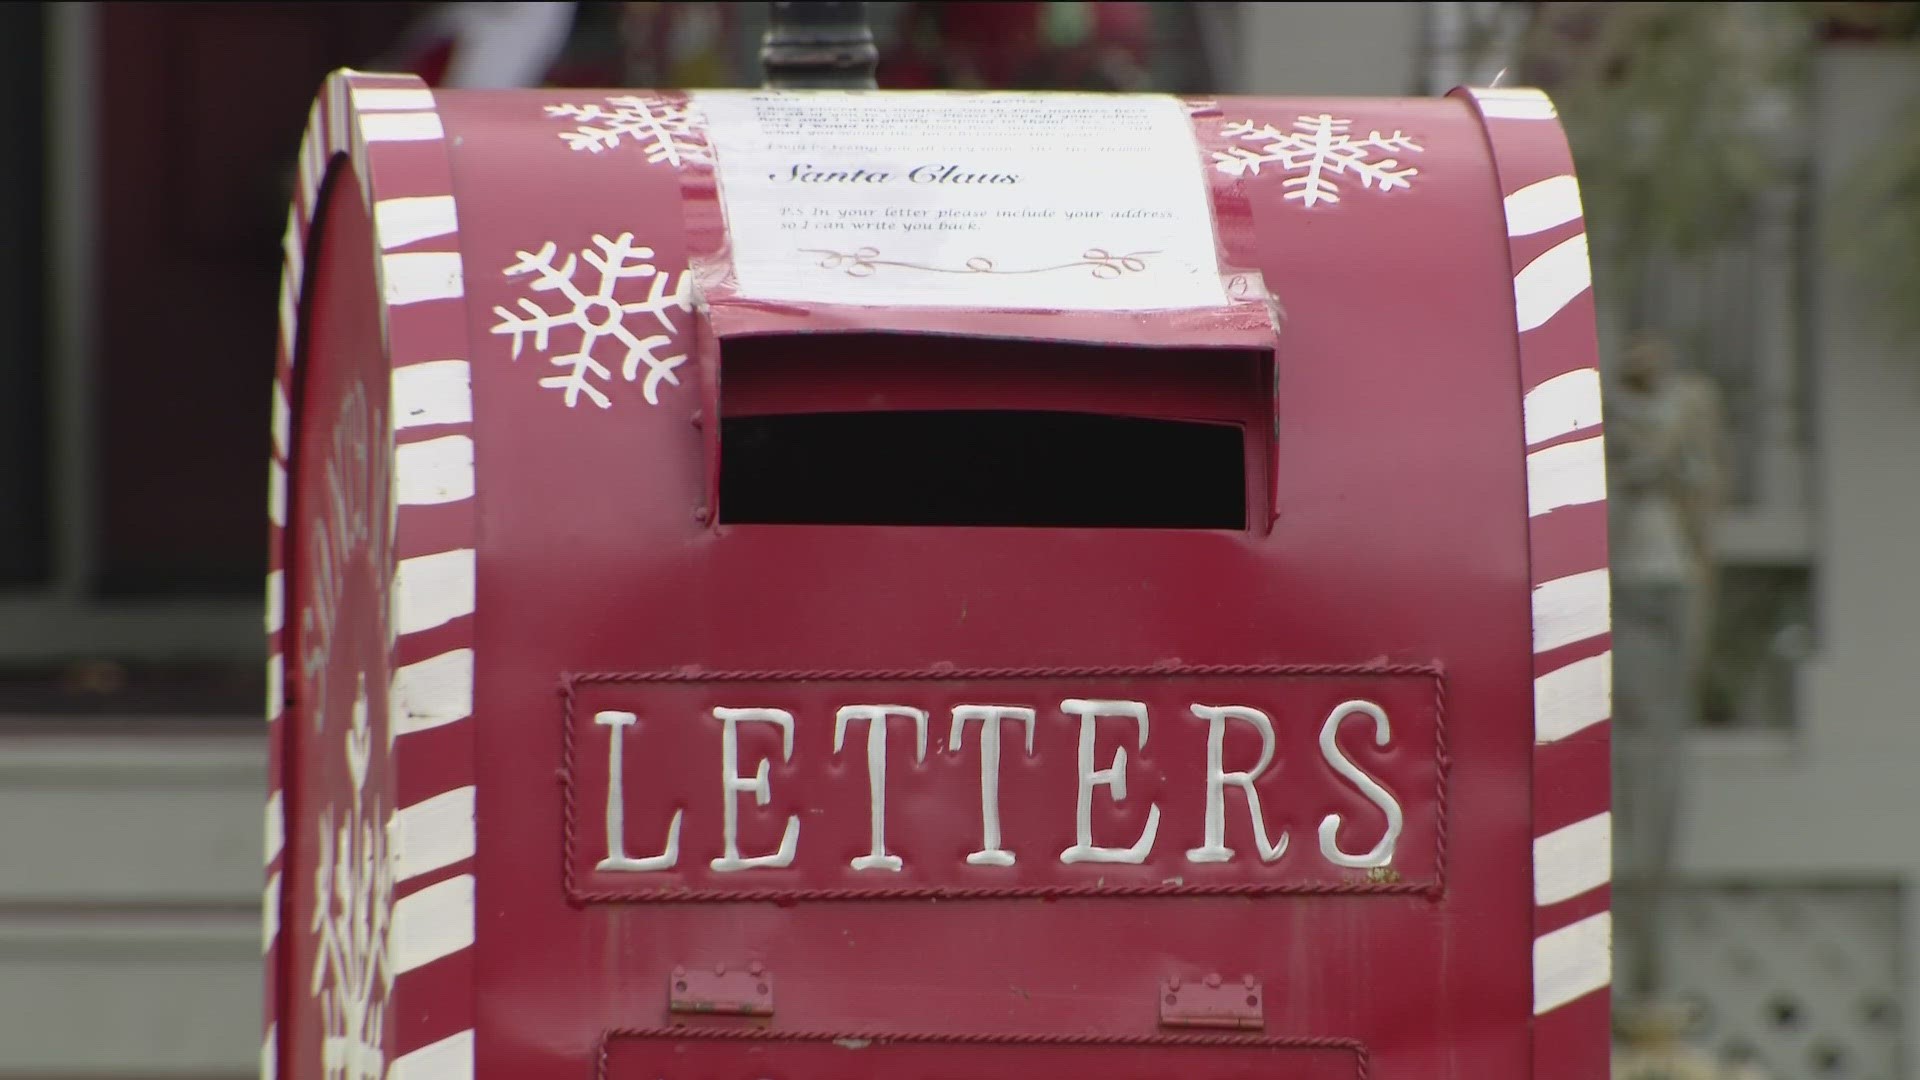 Richelle and Gary Jader also wrote a book called The Santa Mailbox they say is a story for all of Santa's helpers.